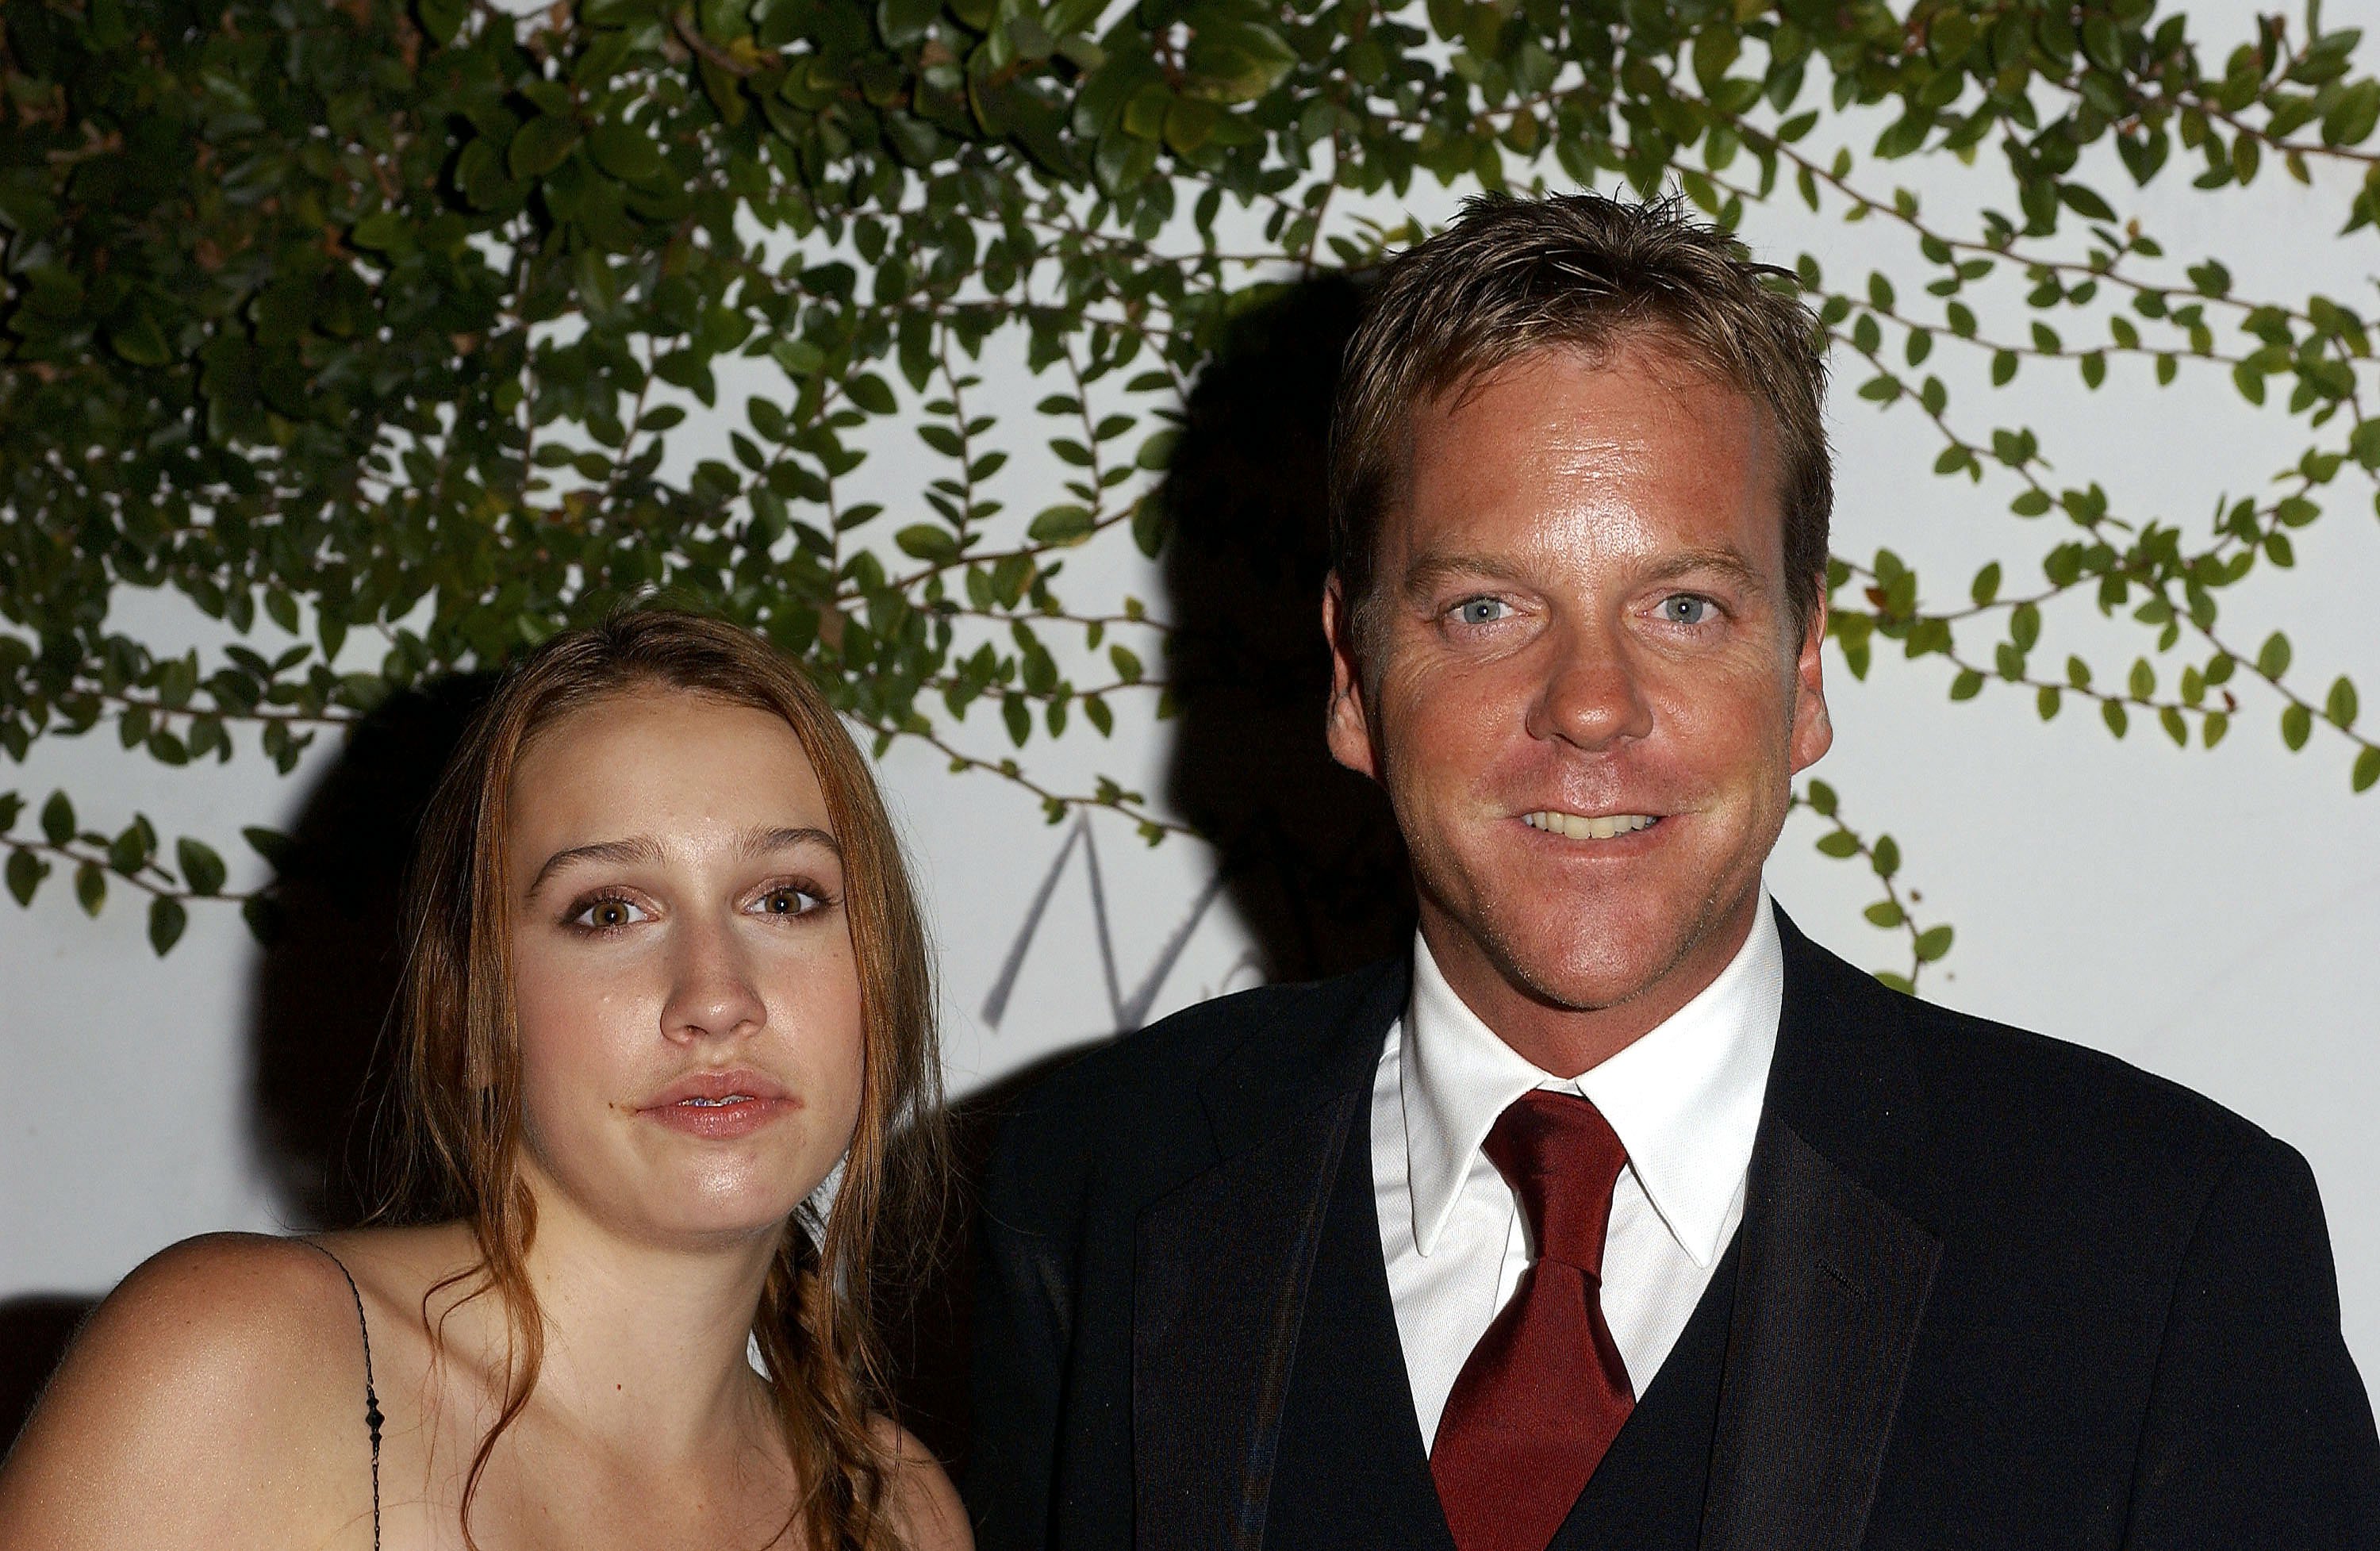 Kiefer and Sarah Sutherland at the Fox TV Emmy After Party at Mortons in West Hollywood, California on September 21, 2003 | Sources: Getty Images